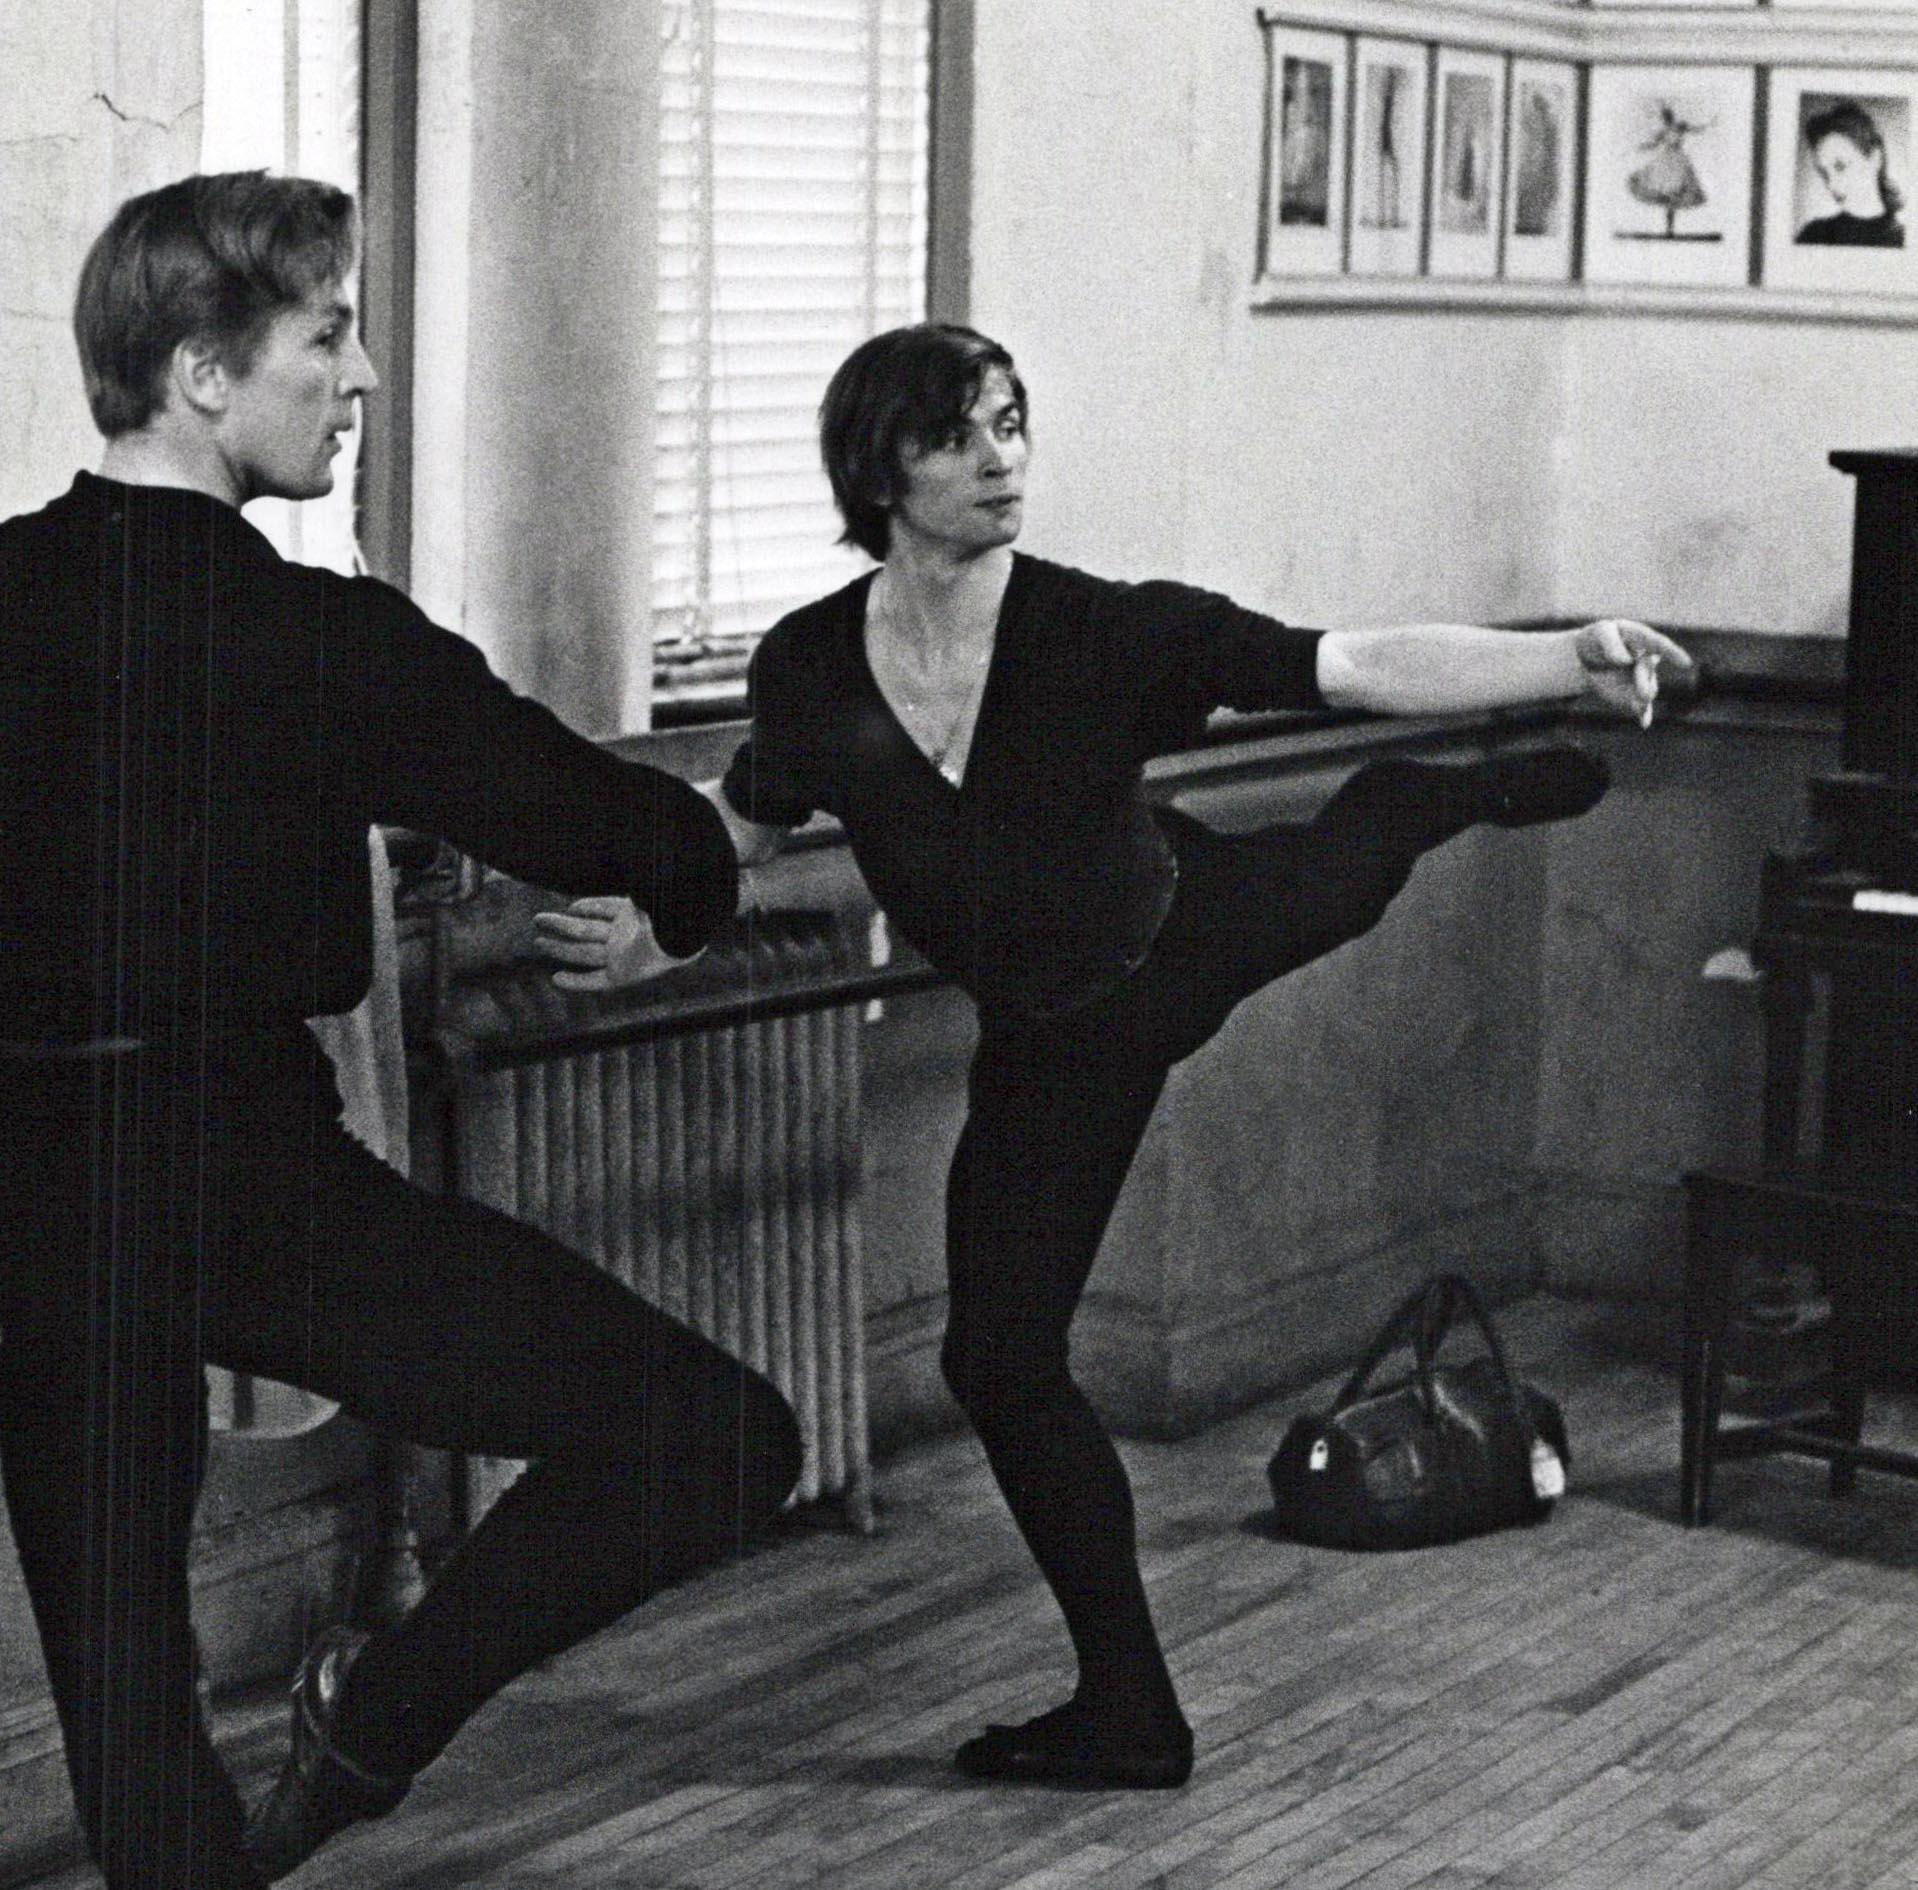 Rudolf Nureyev and Erik Bruhn rehearsing in NYC - Photograph by Jack Mitchell